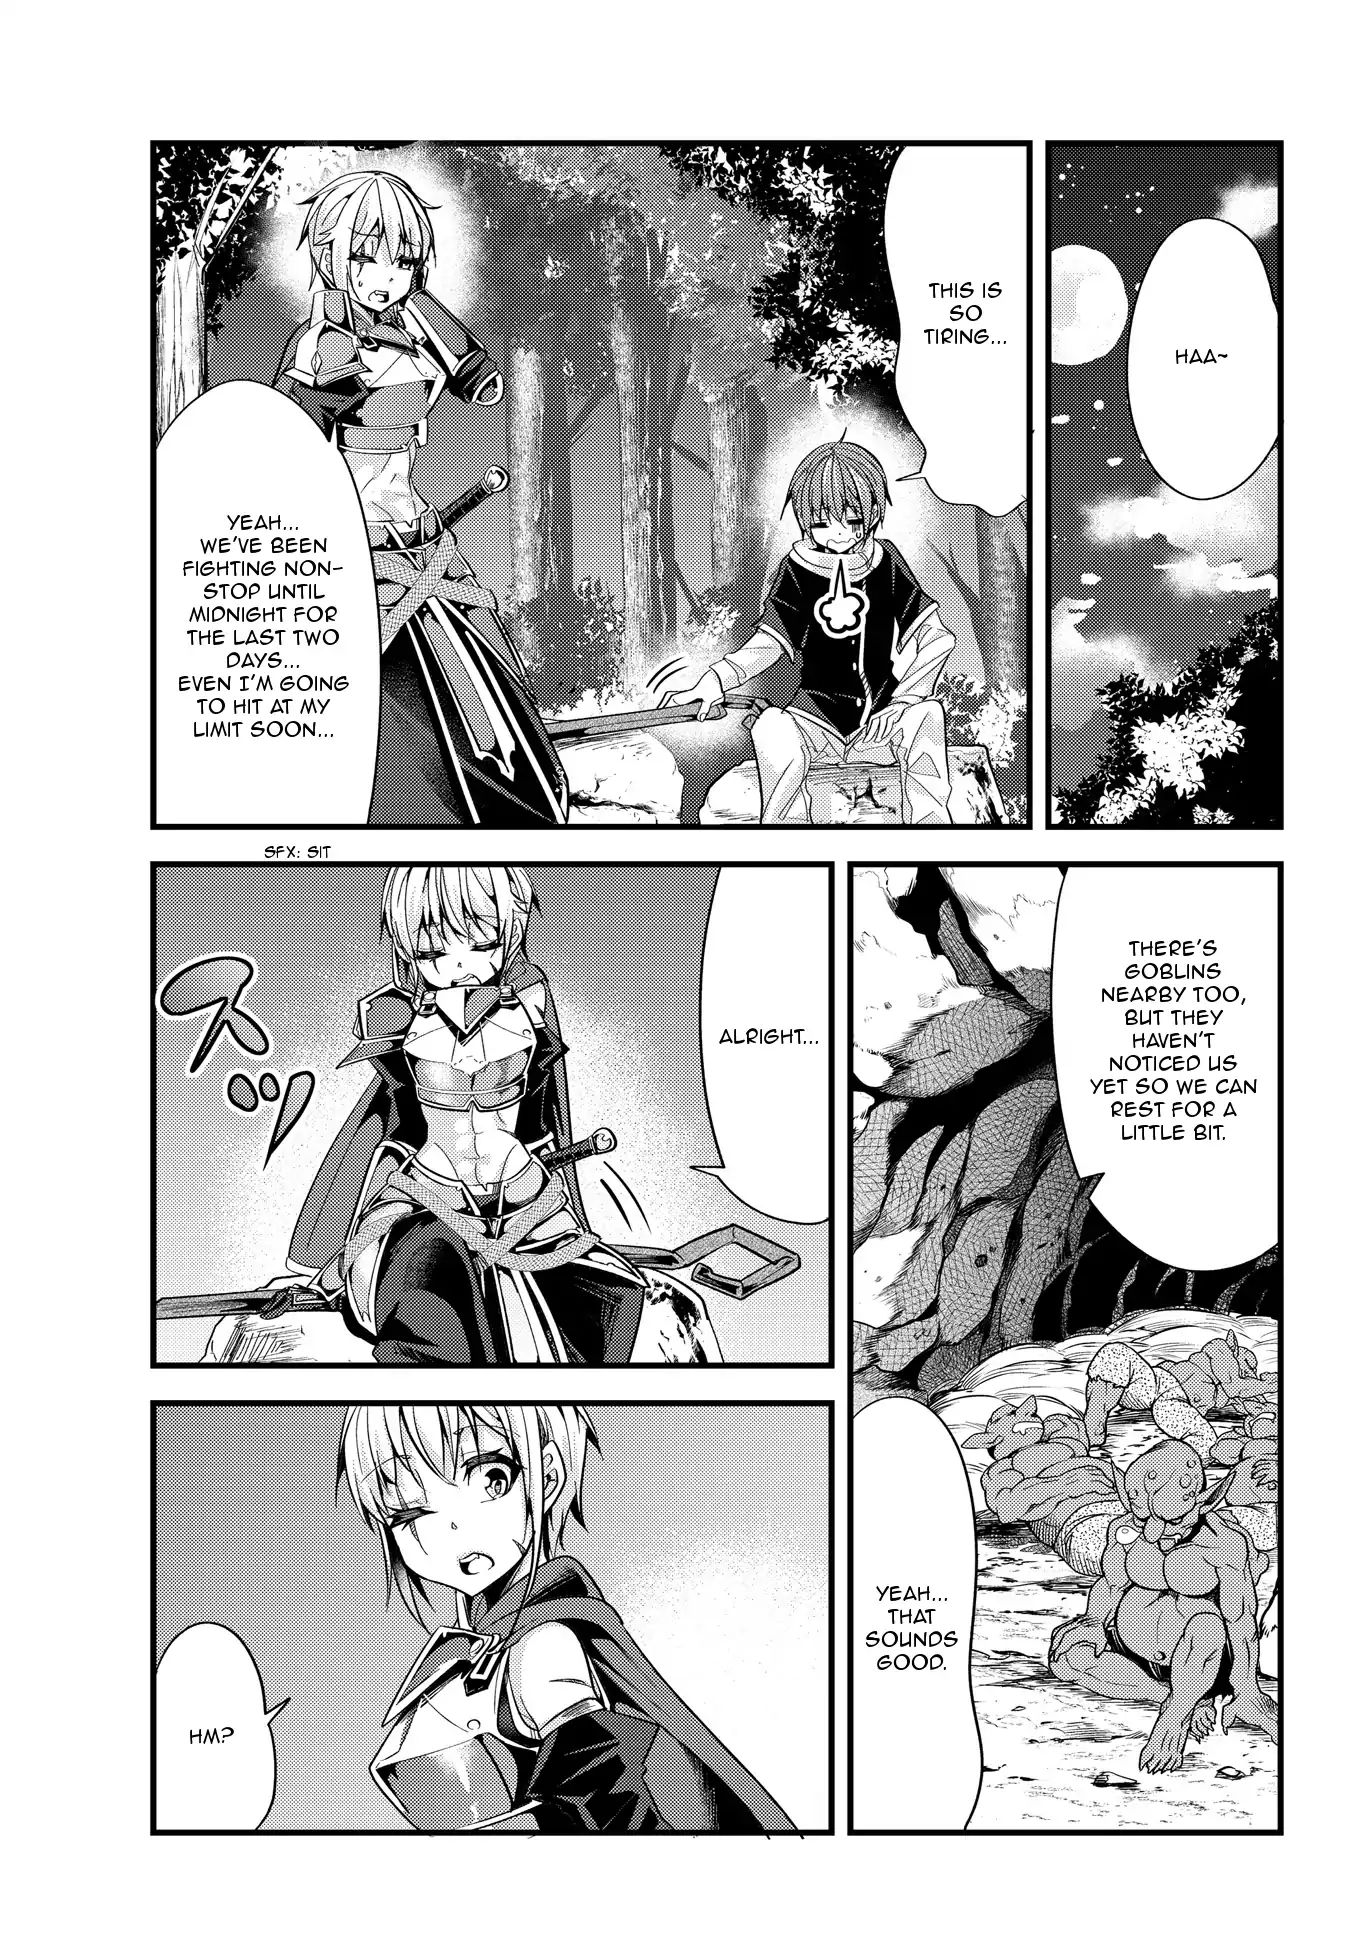 A Story About Treating A Female Knight Who Has Never Been Treated As A Woman As A Woman - Page 1